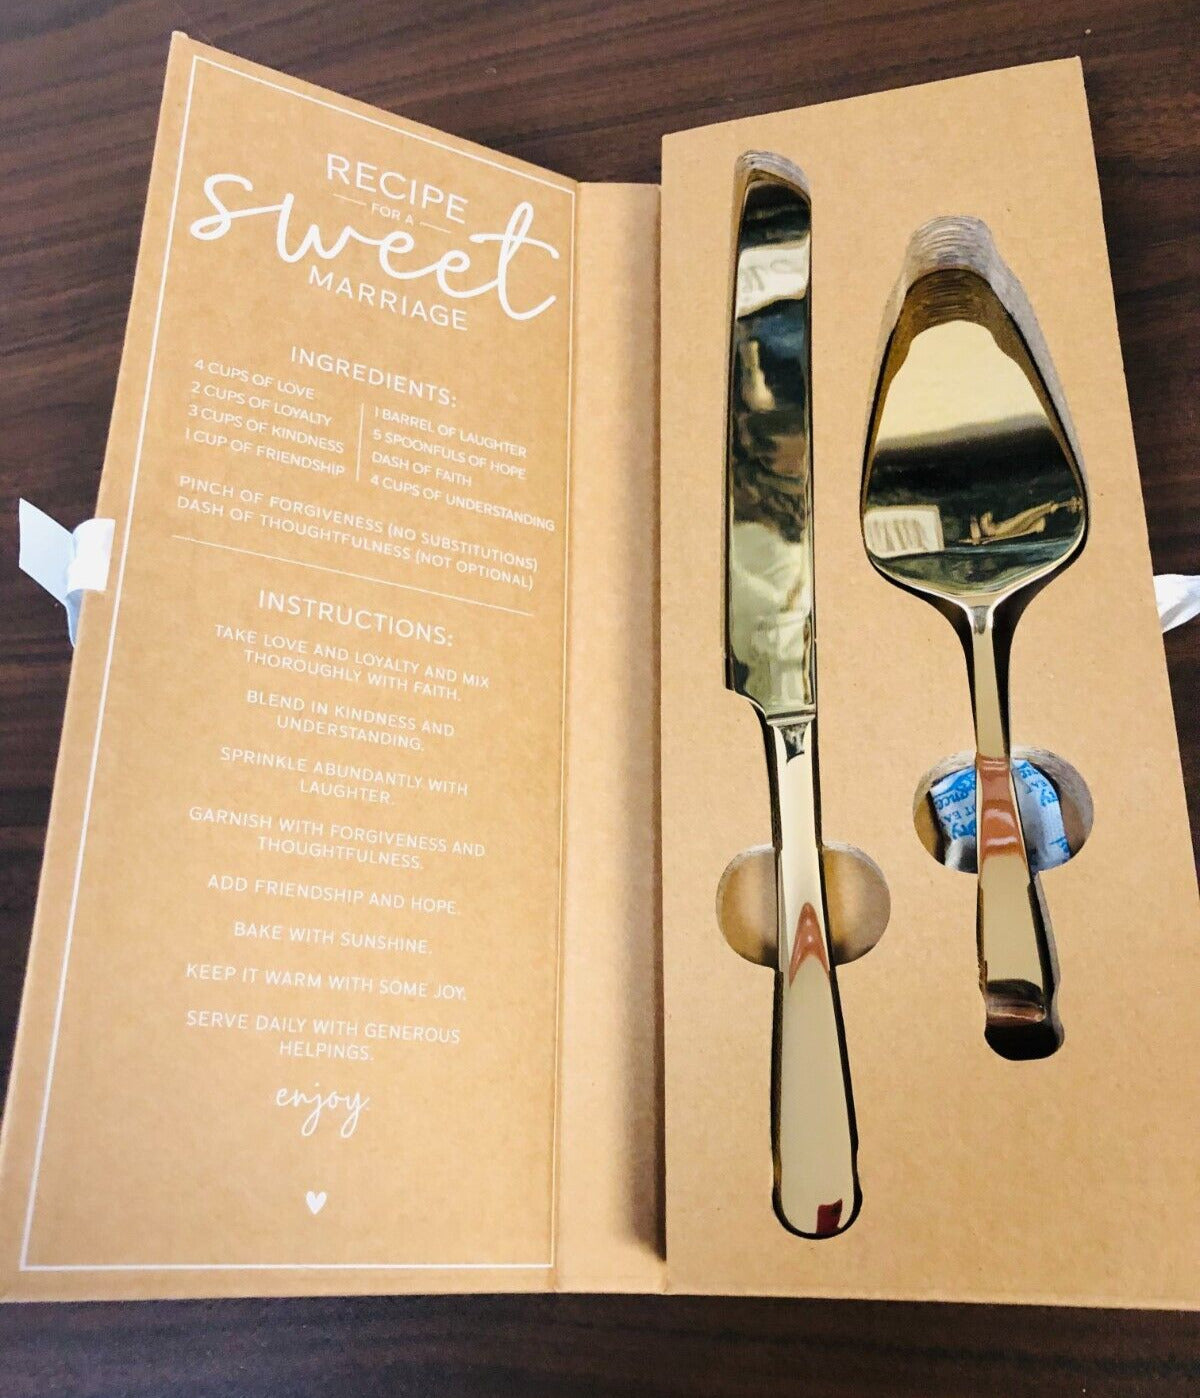 Gold Cake Serving Set with Recipe for a Sweet Marriage, New - Bob and Penny Lord